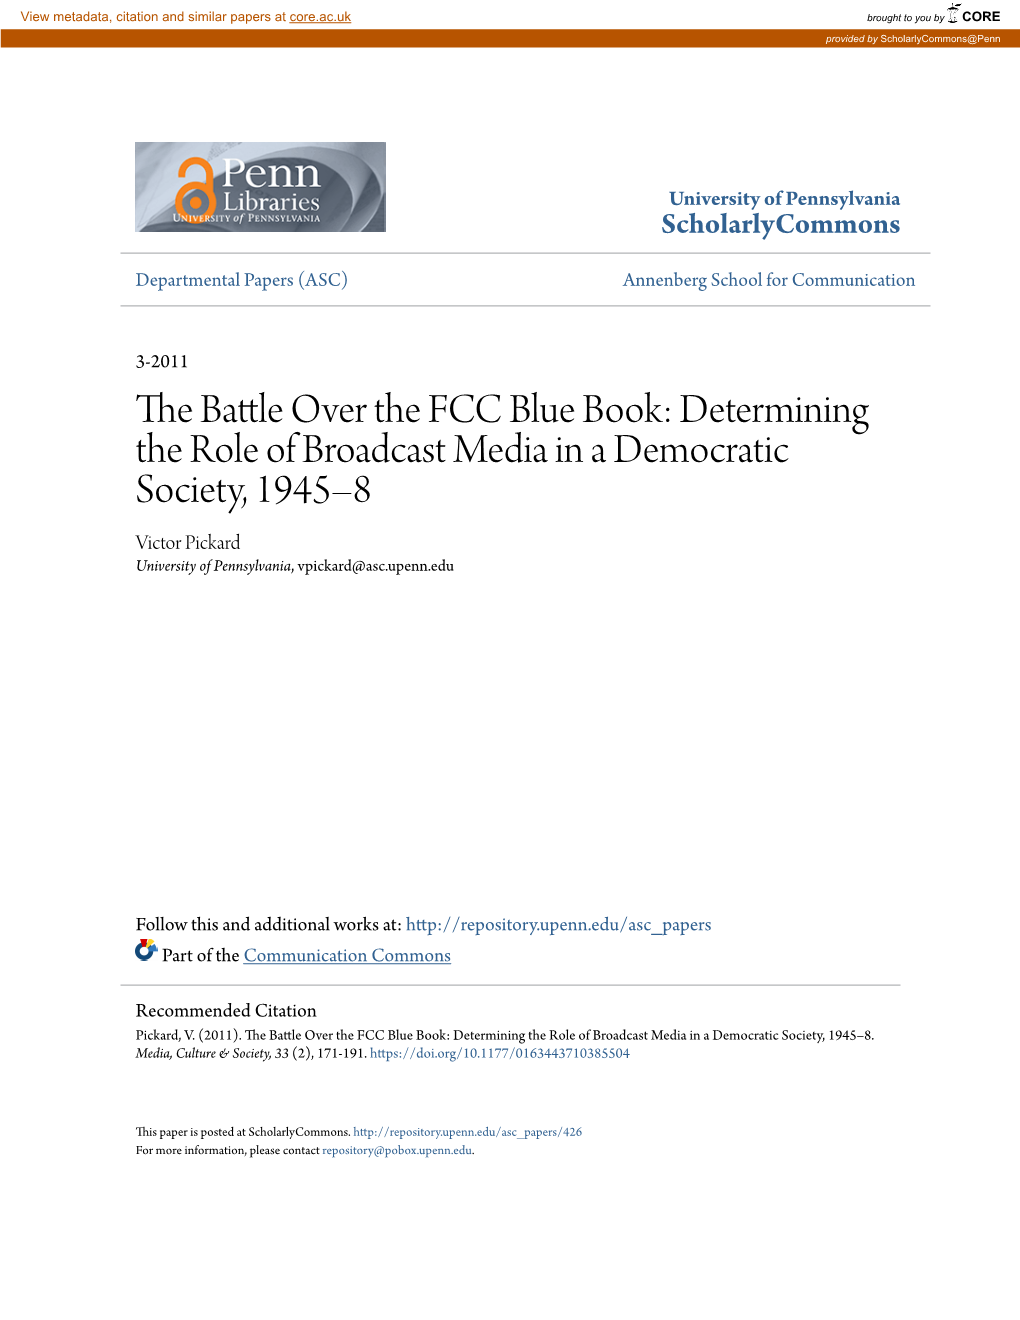 The Battle Over the FCC Blue Book: Determining the Role of Broadcast Media in a Democratic Society, 1945–8